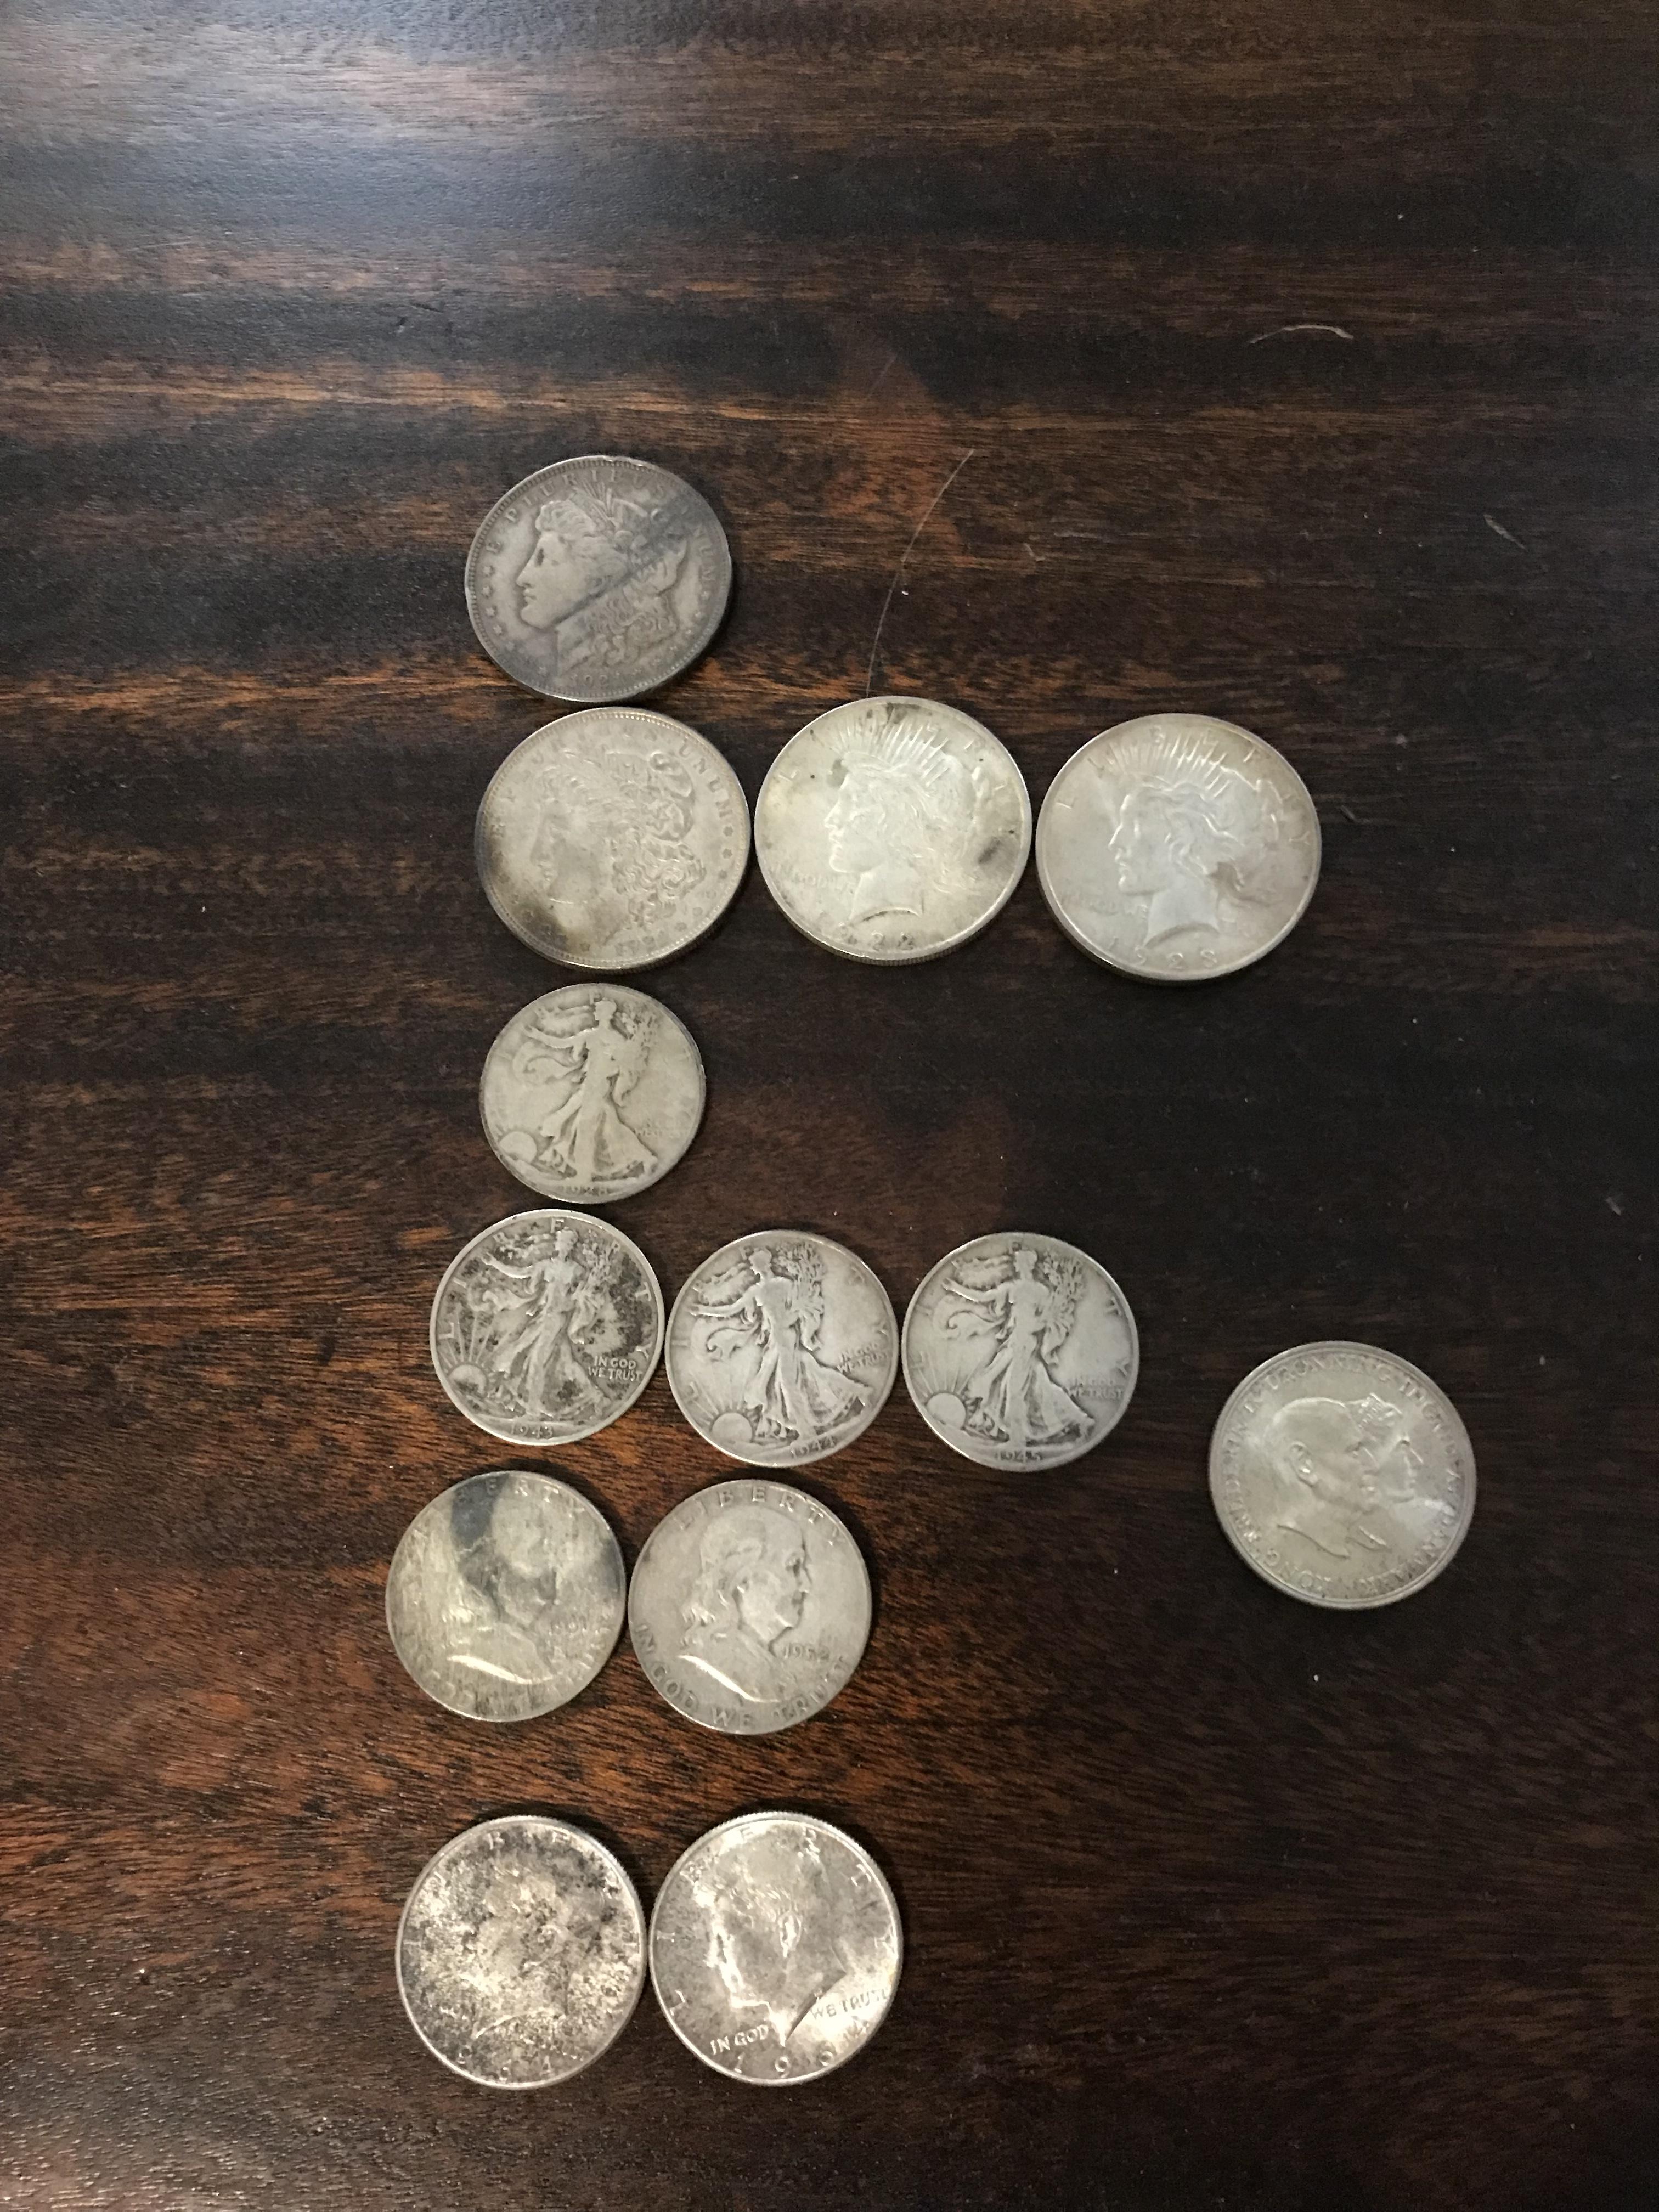 "Mostly just plain old coins but a few that stuck out. Some 1920s silver dollars in particular. 2 from 1921, a 1922 and a 1923. This has got to be worth something..."